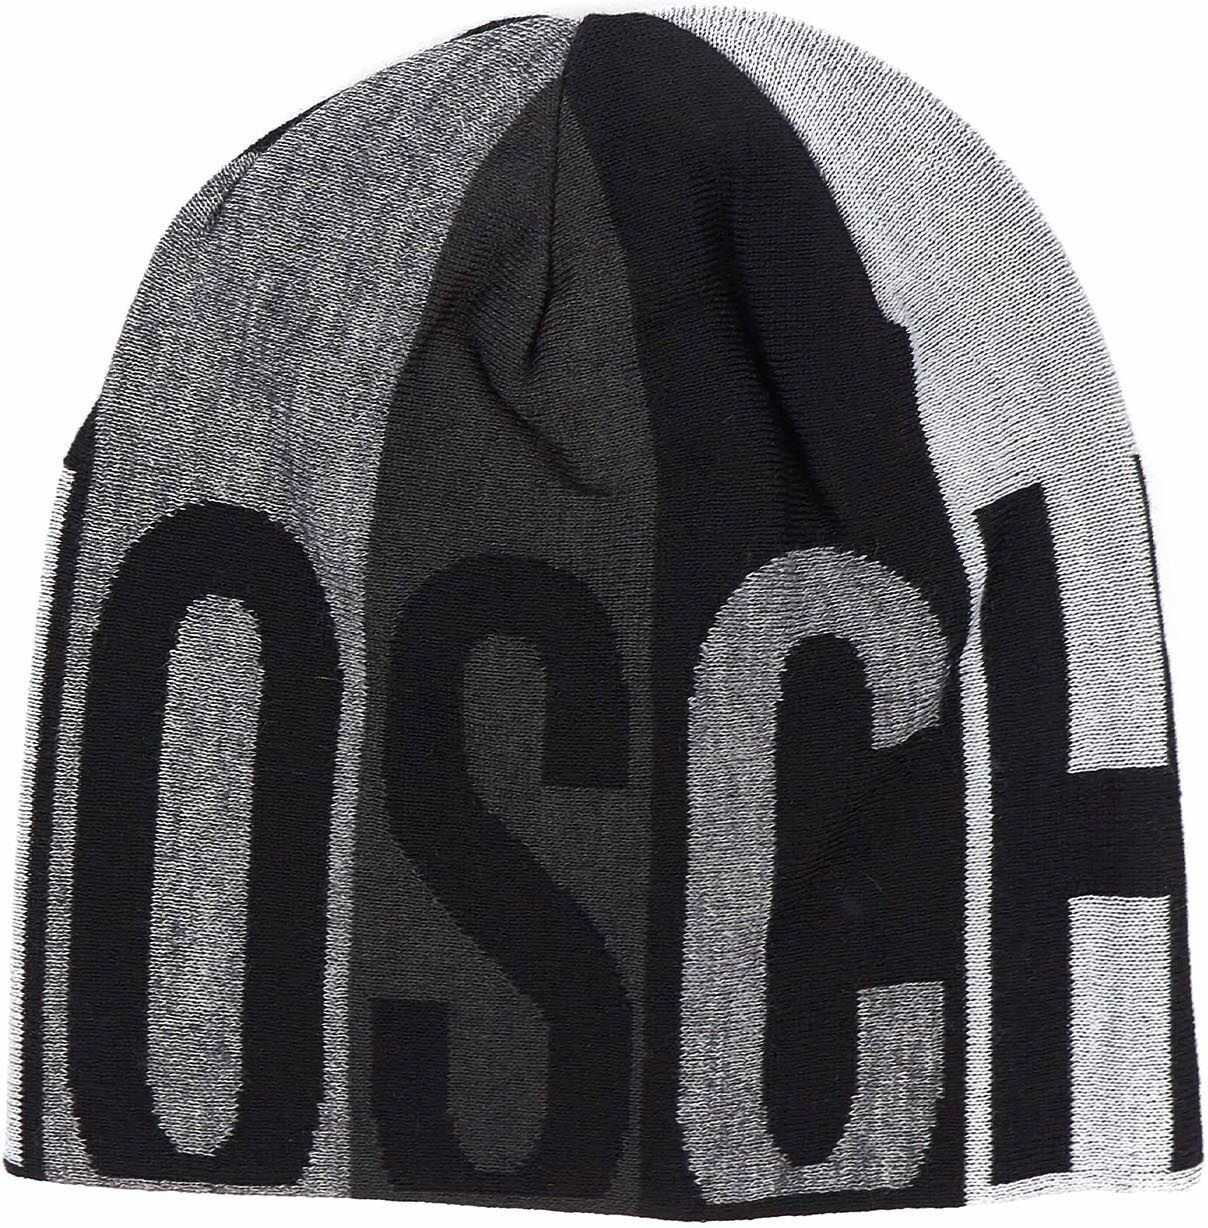 Moschino Beanie with logo writting colored